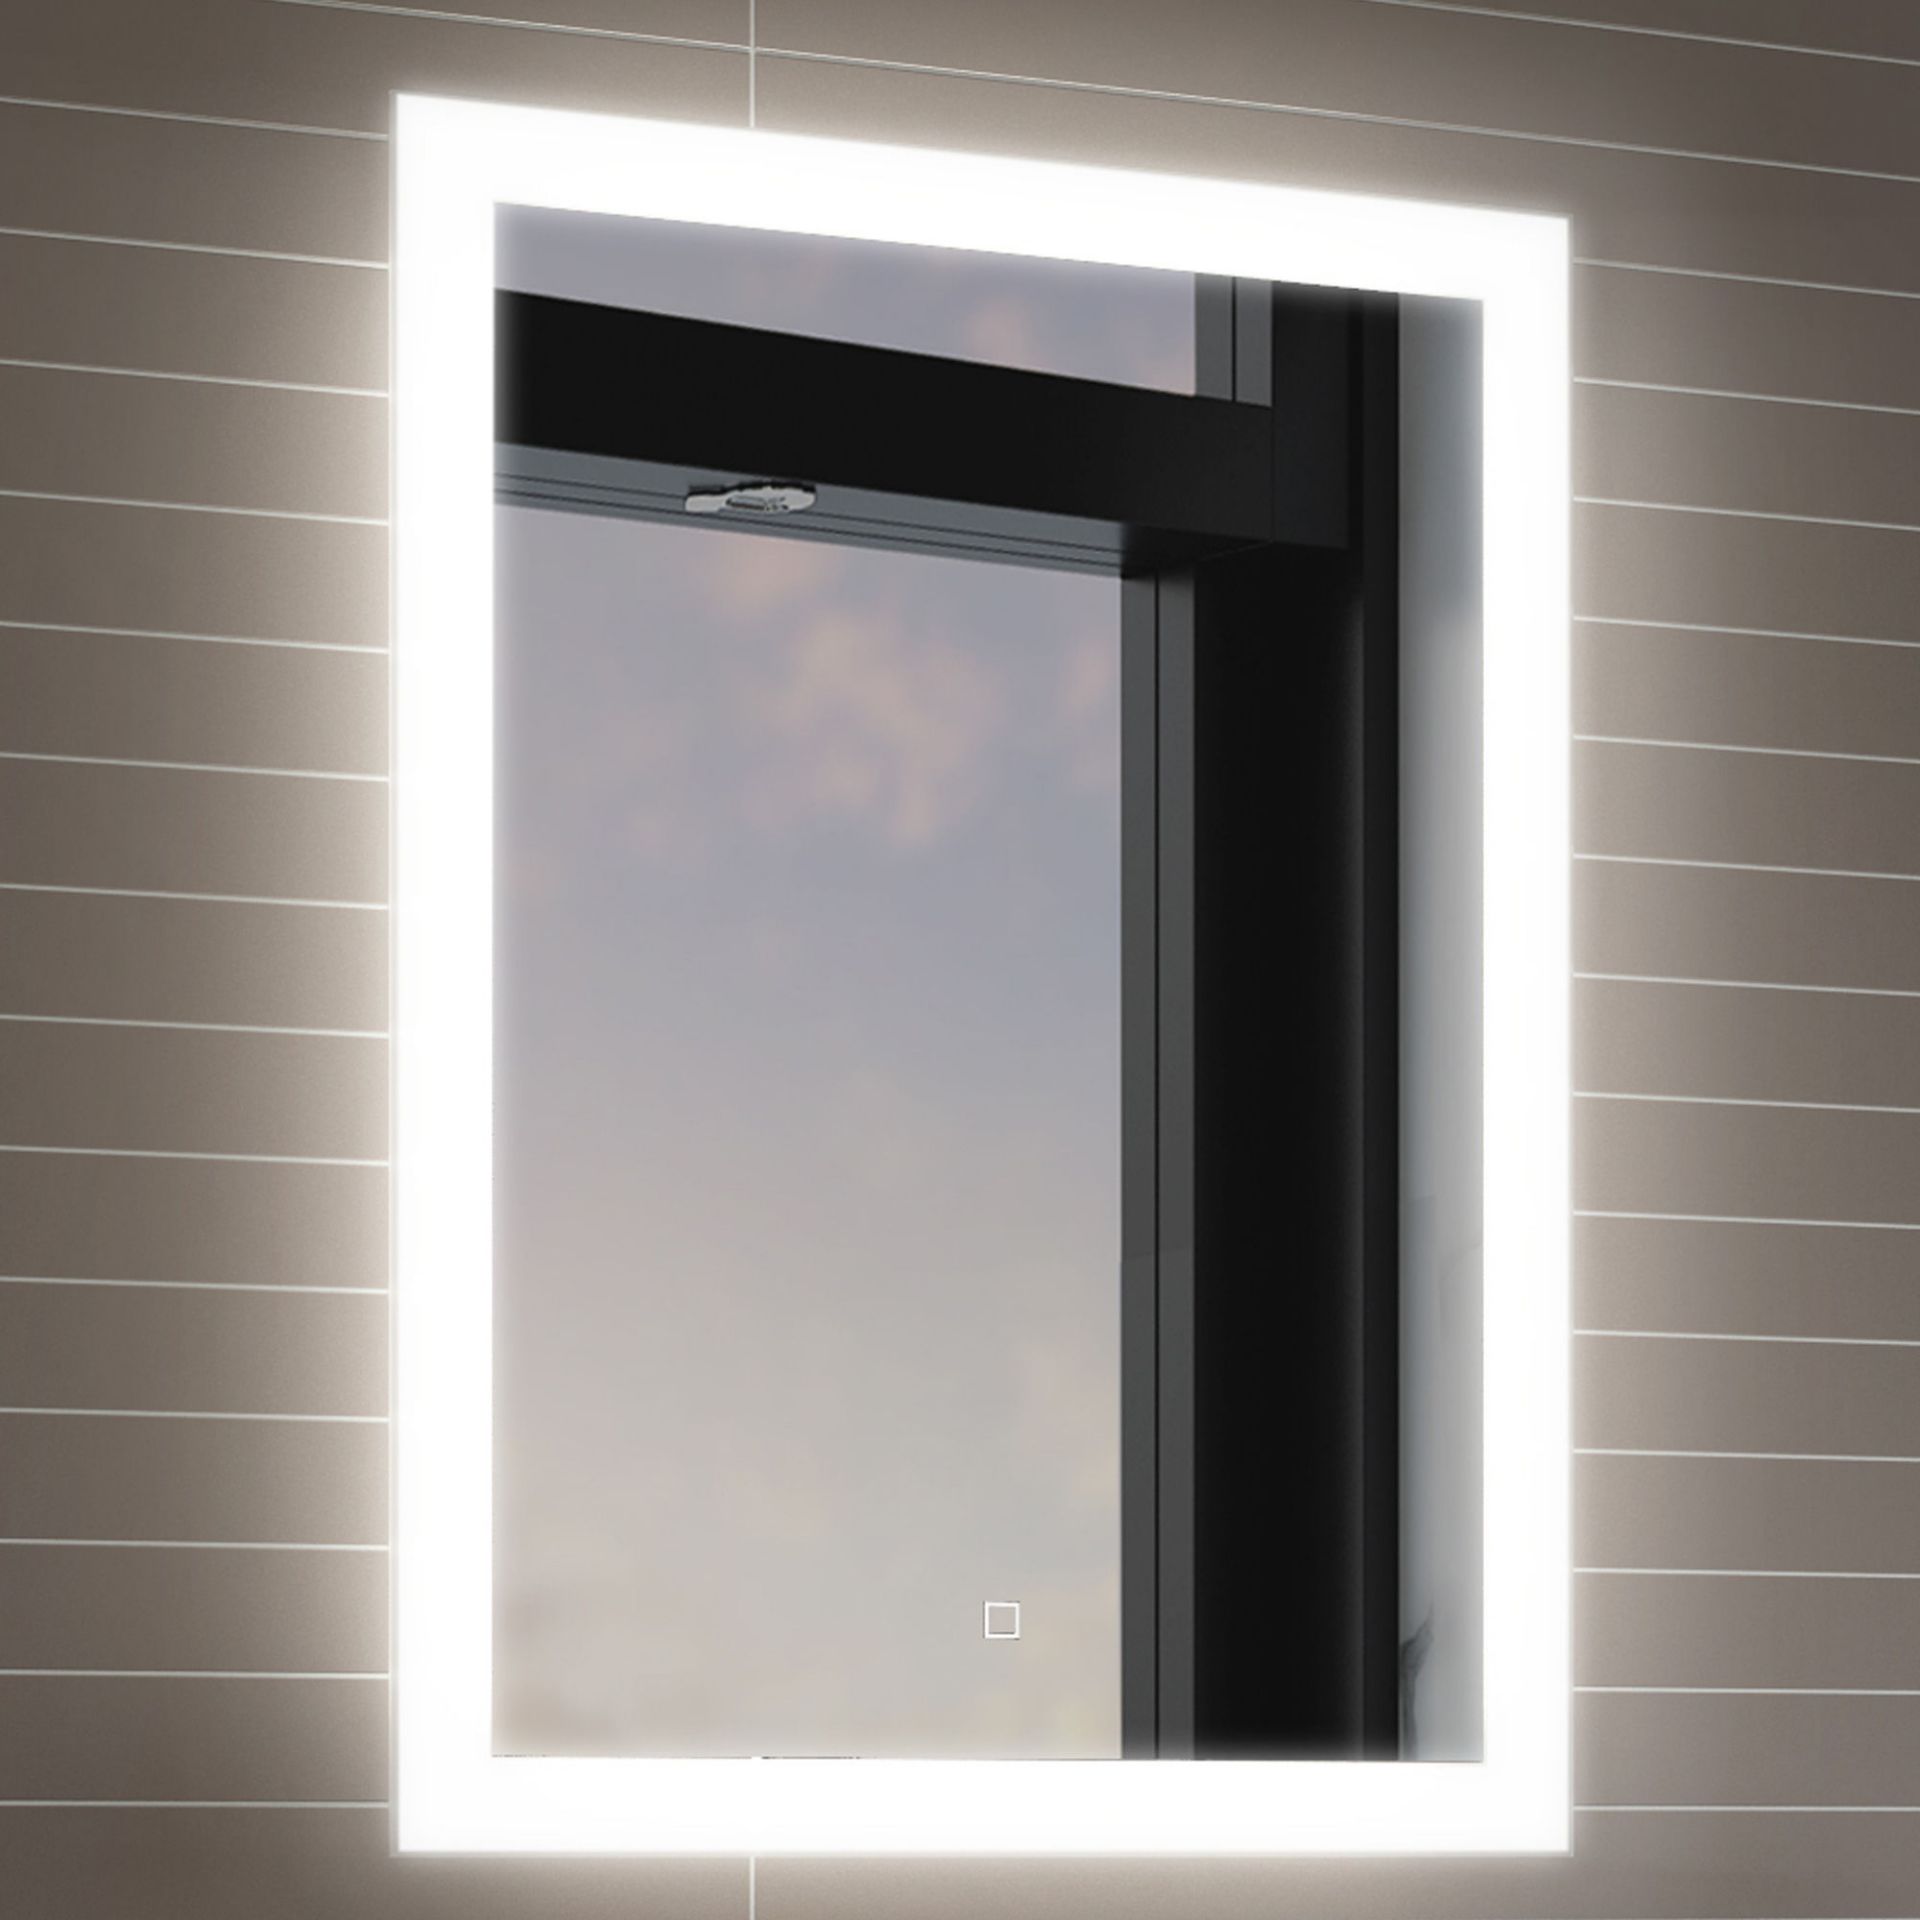 (DK149) 500x700mm Orion Illuminated LED Mirror - Switch Control. RRP £349.99. Energy efficient LED